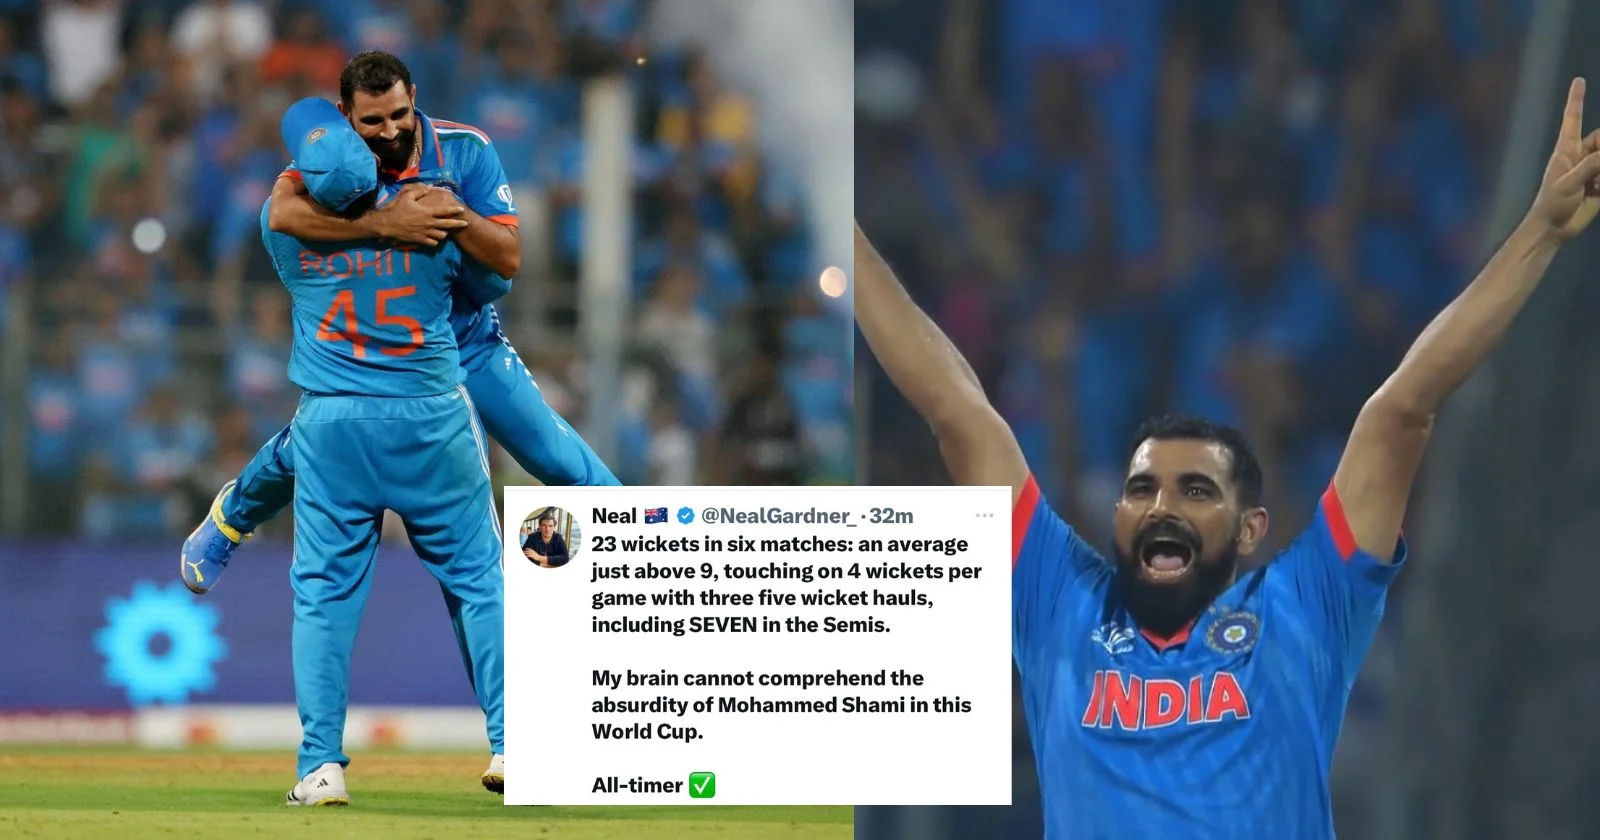 Memes Galore As Mohammed Shami Picks Up 7 Wickets In World Cup Semi-Final